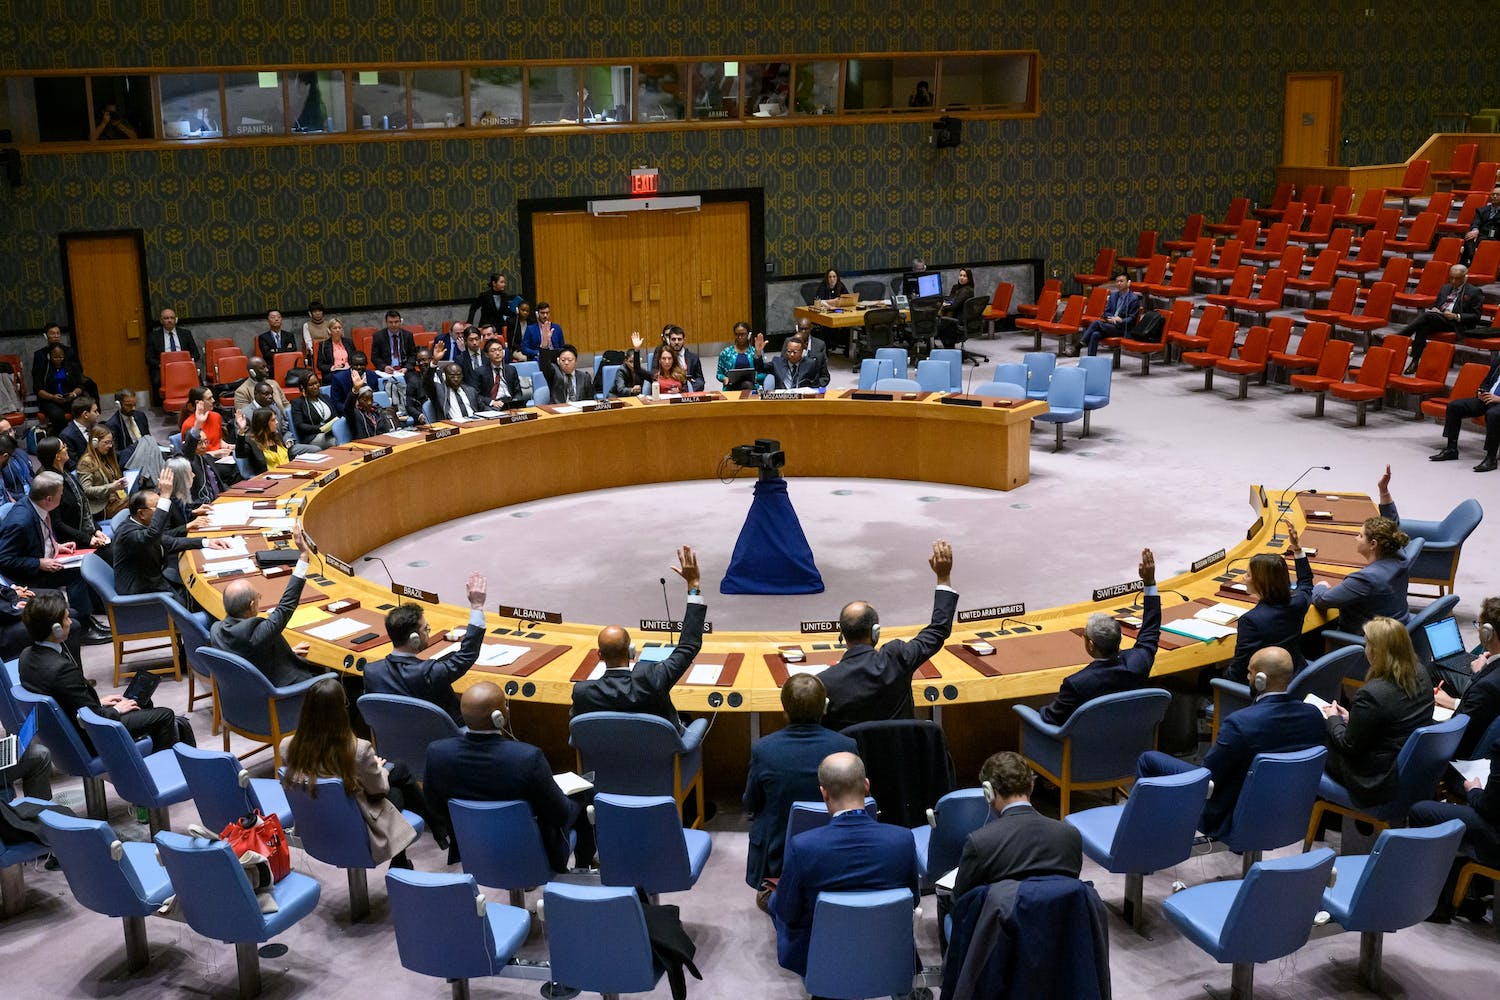 The UN resolution could be a turning point in the Gaza conflict